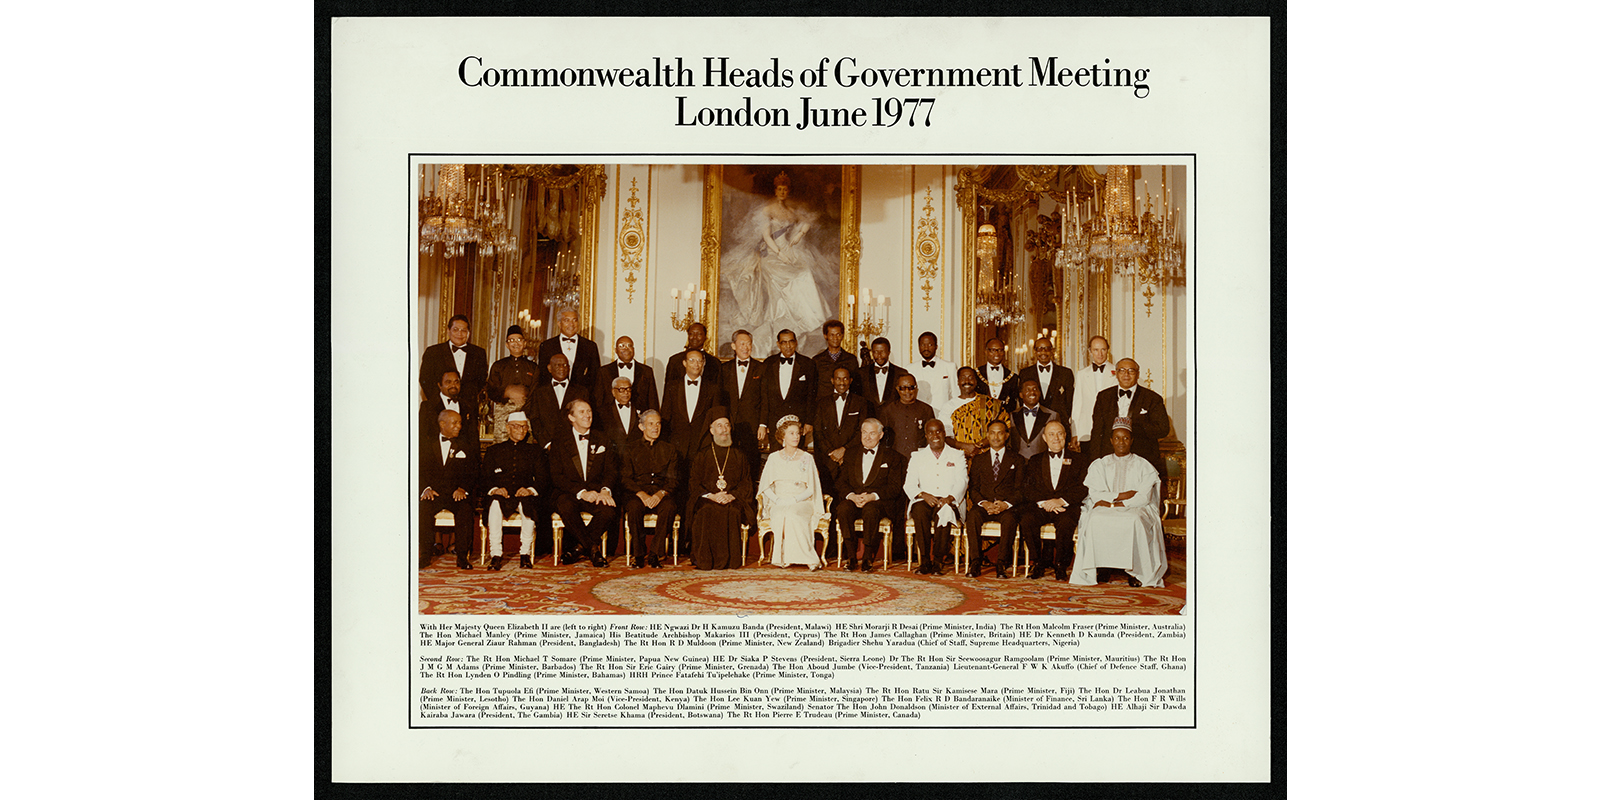 Group photograph of the Commonwealth Heads of Government taken in June 1977. The Queen is pictured in the middle of the photograph. (CO 1069/874).